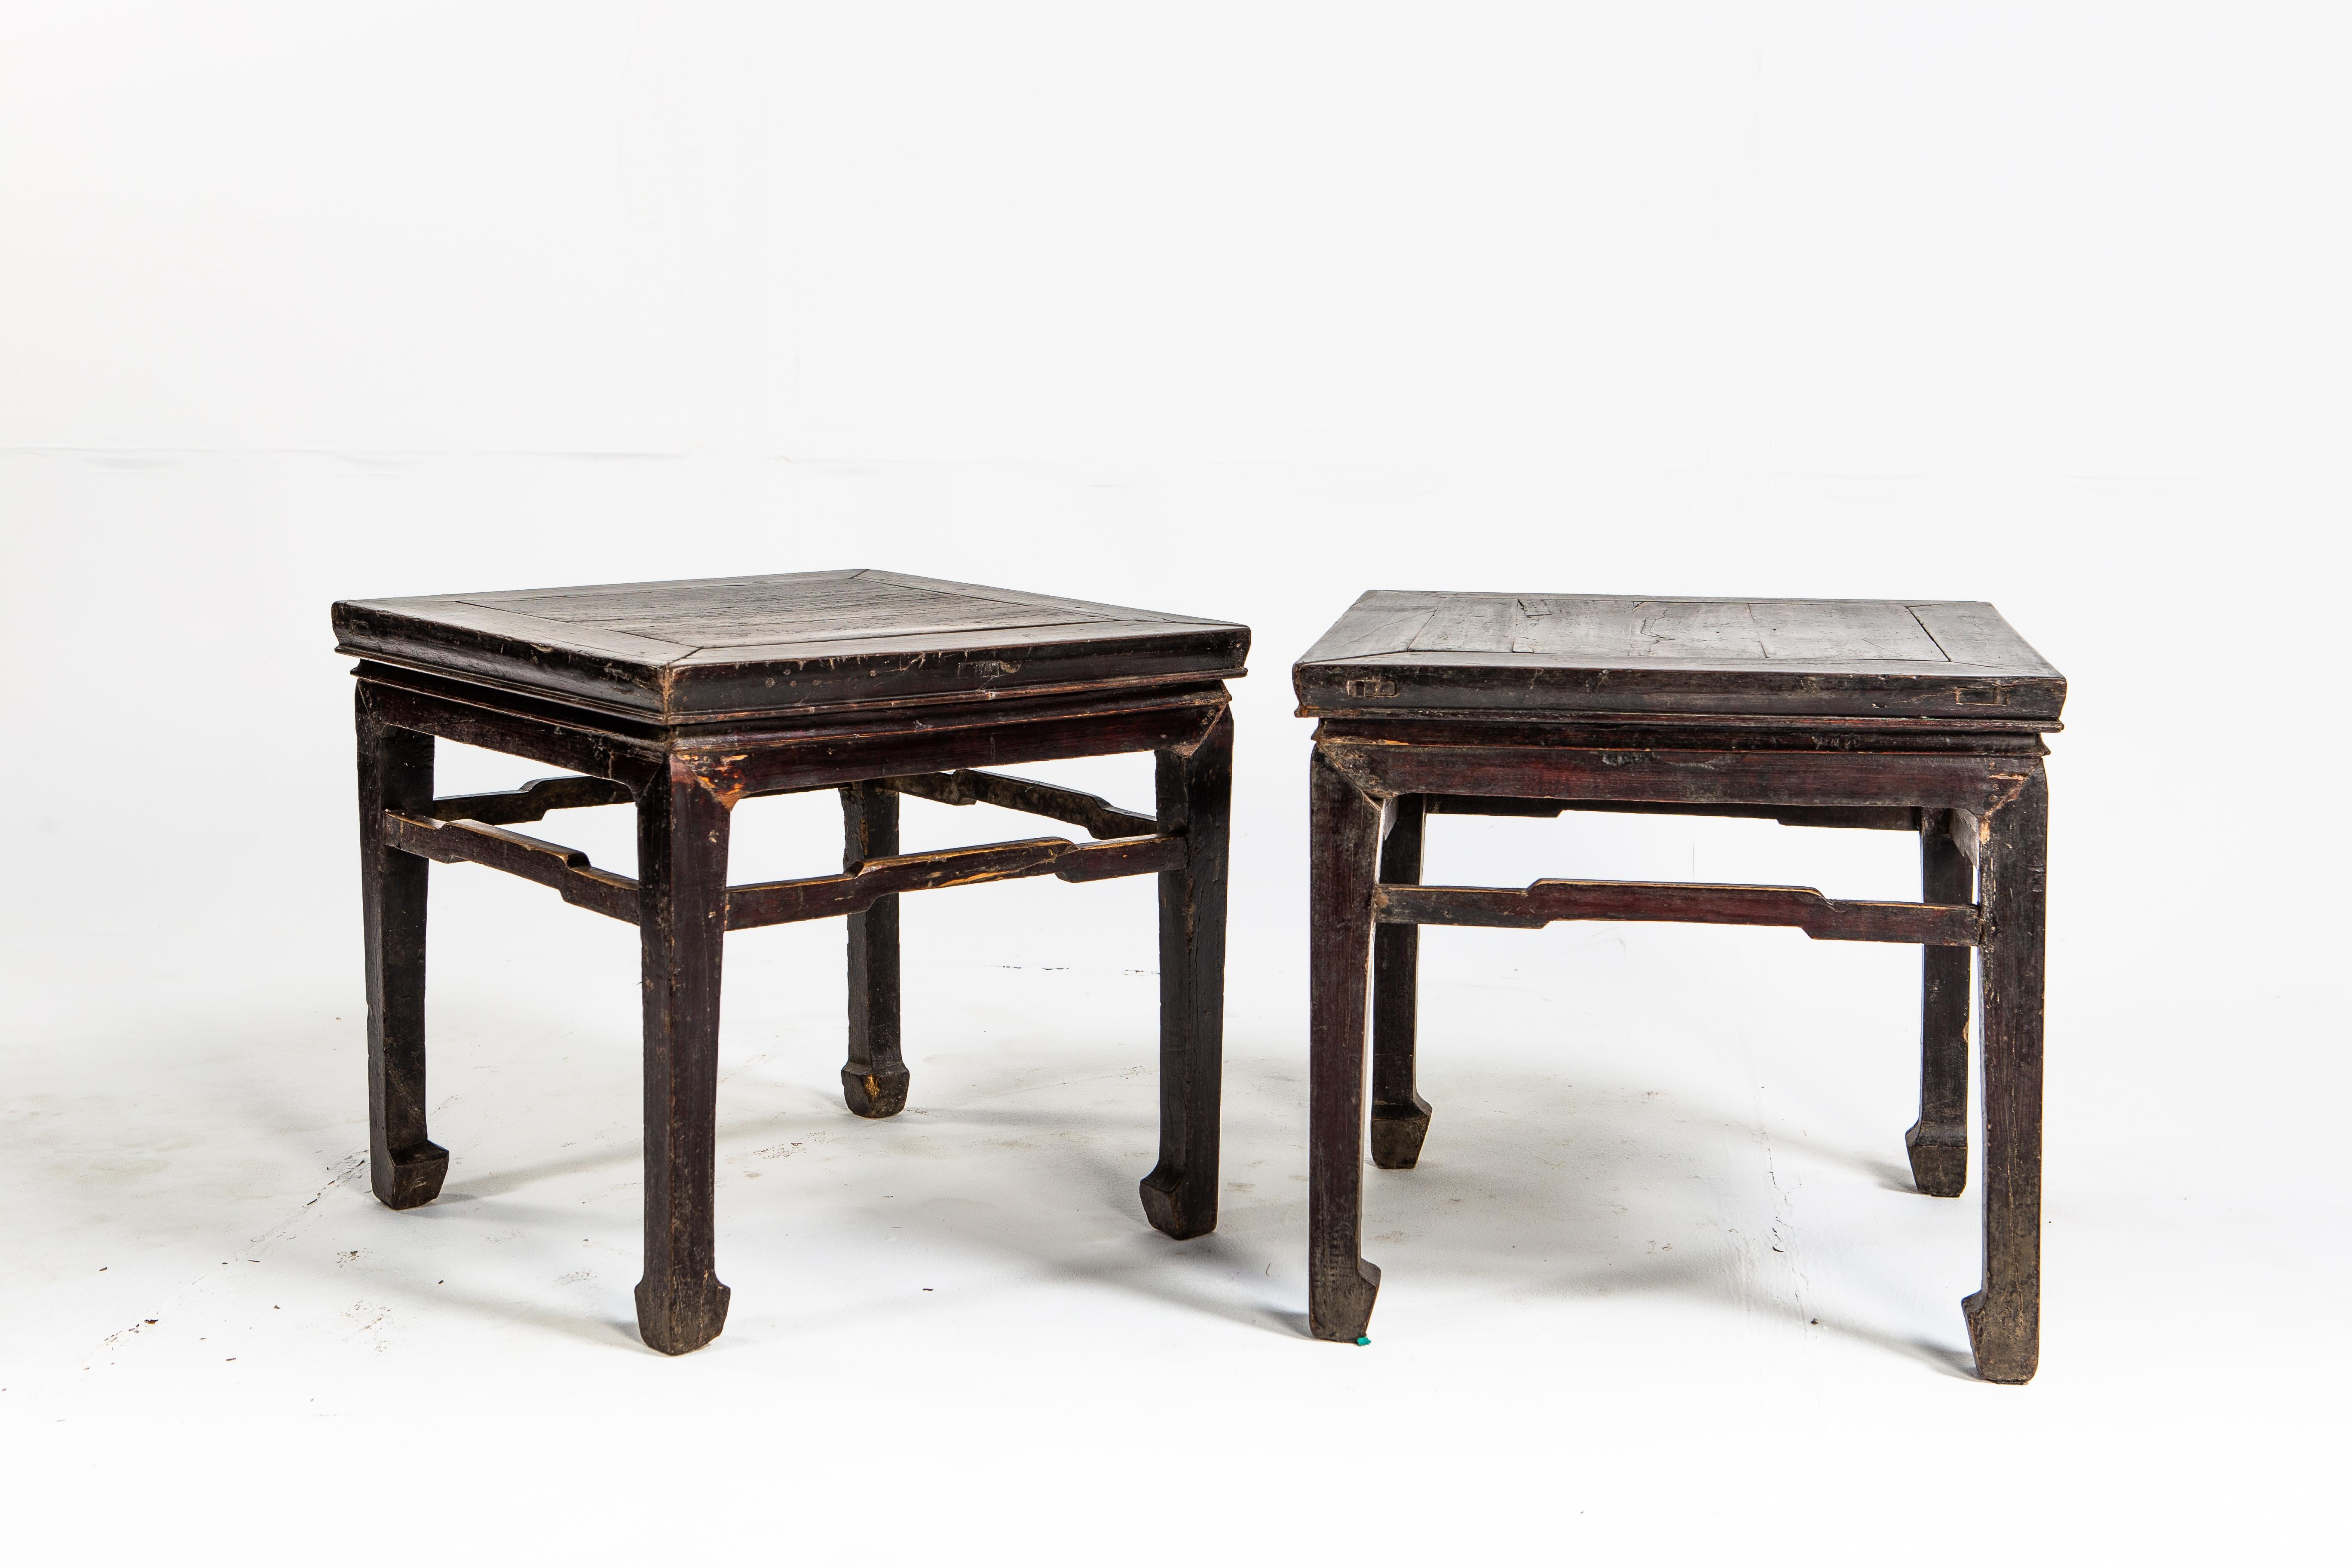 Pair of Qing Dynasty Square Stools (Qing-Dynastie)